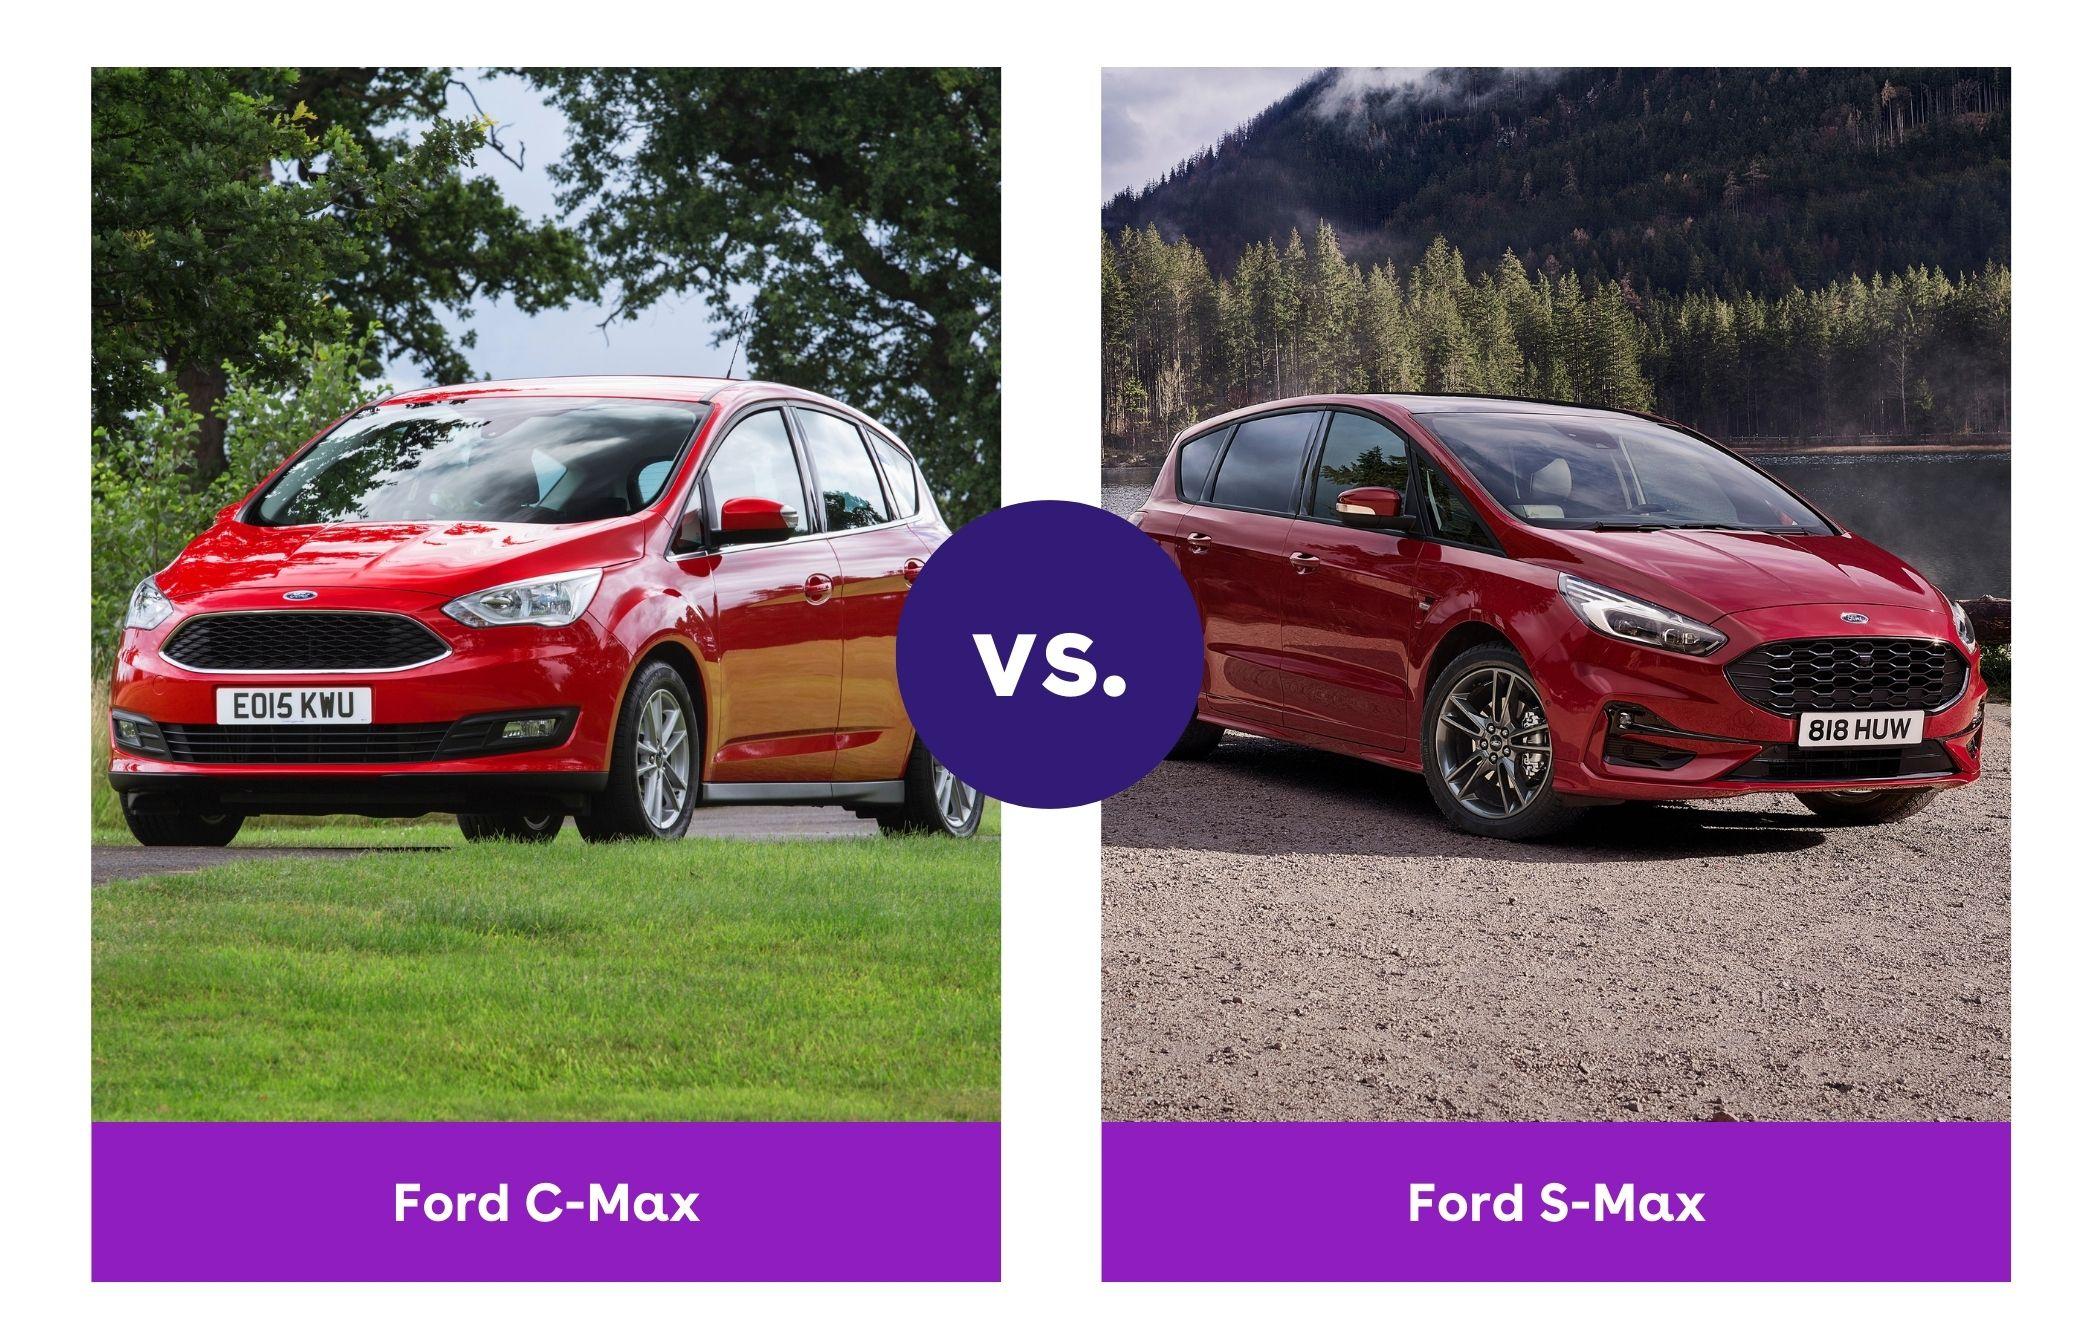 Side-by-side view of red Ford C-Max and red Ford S-Max